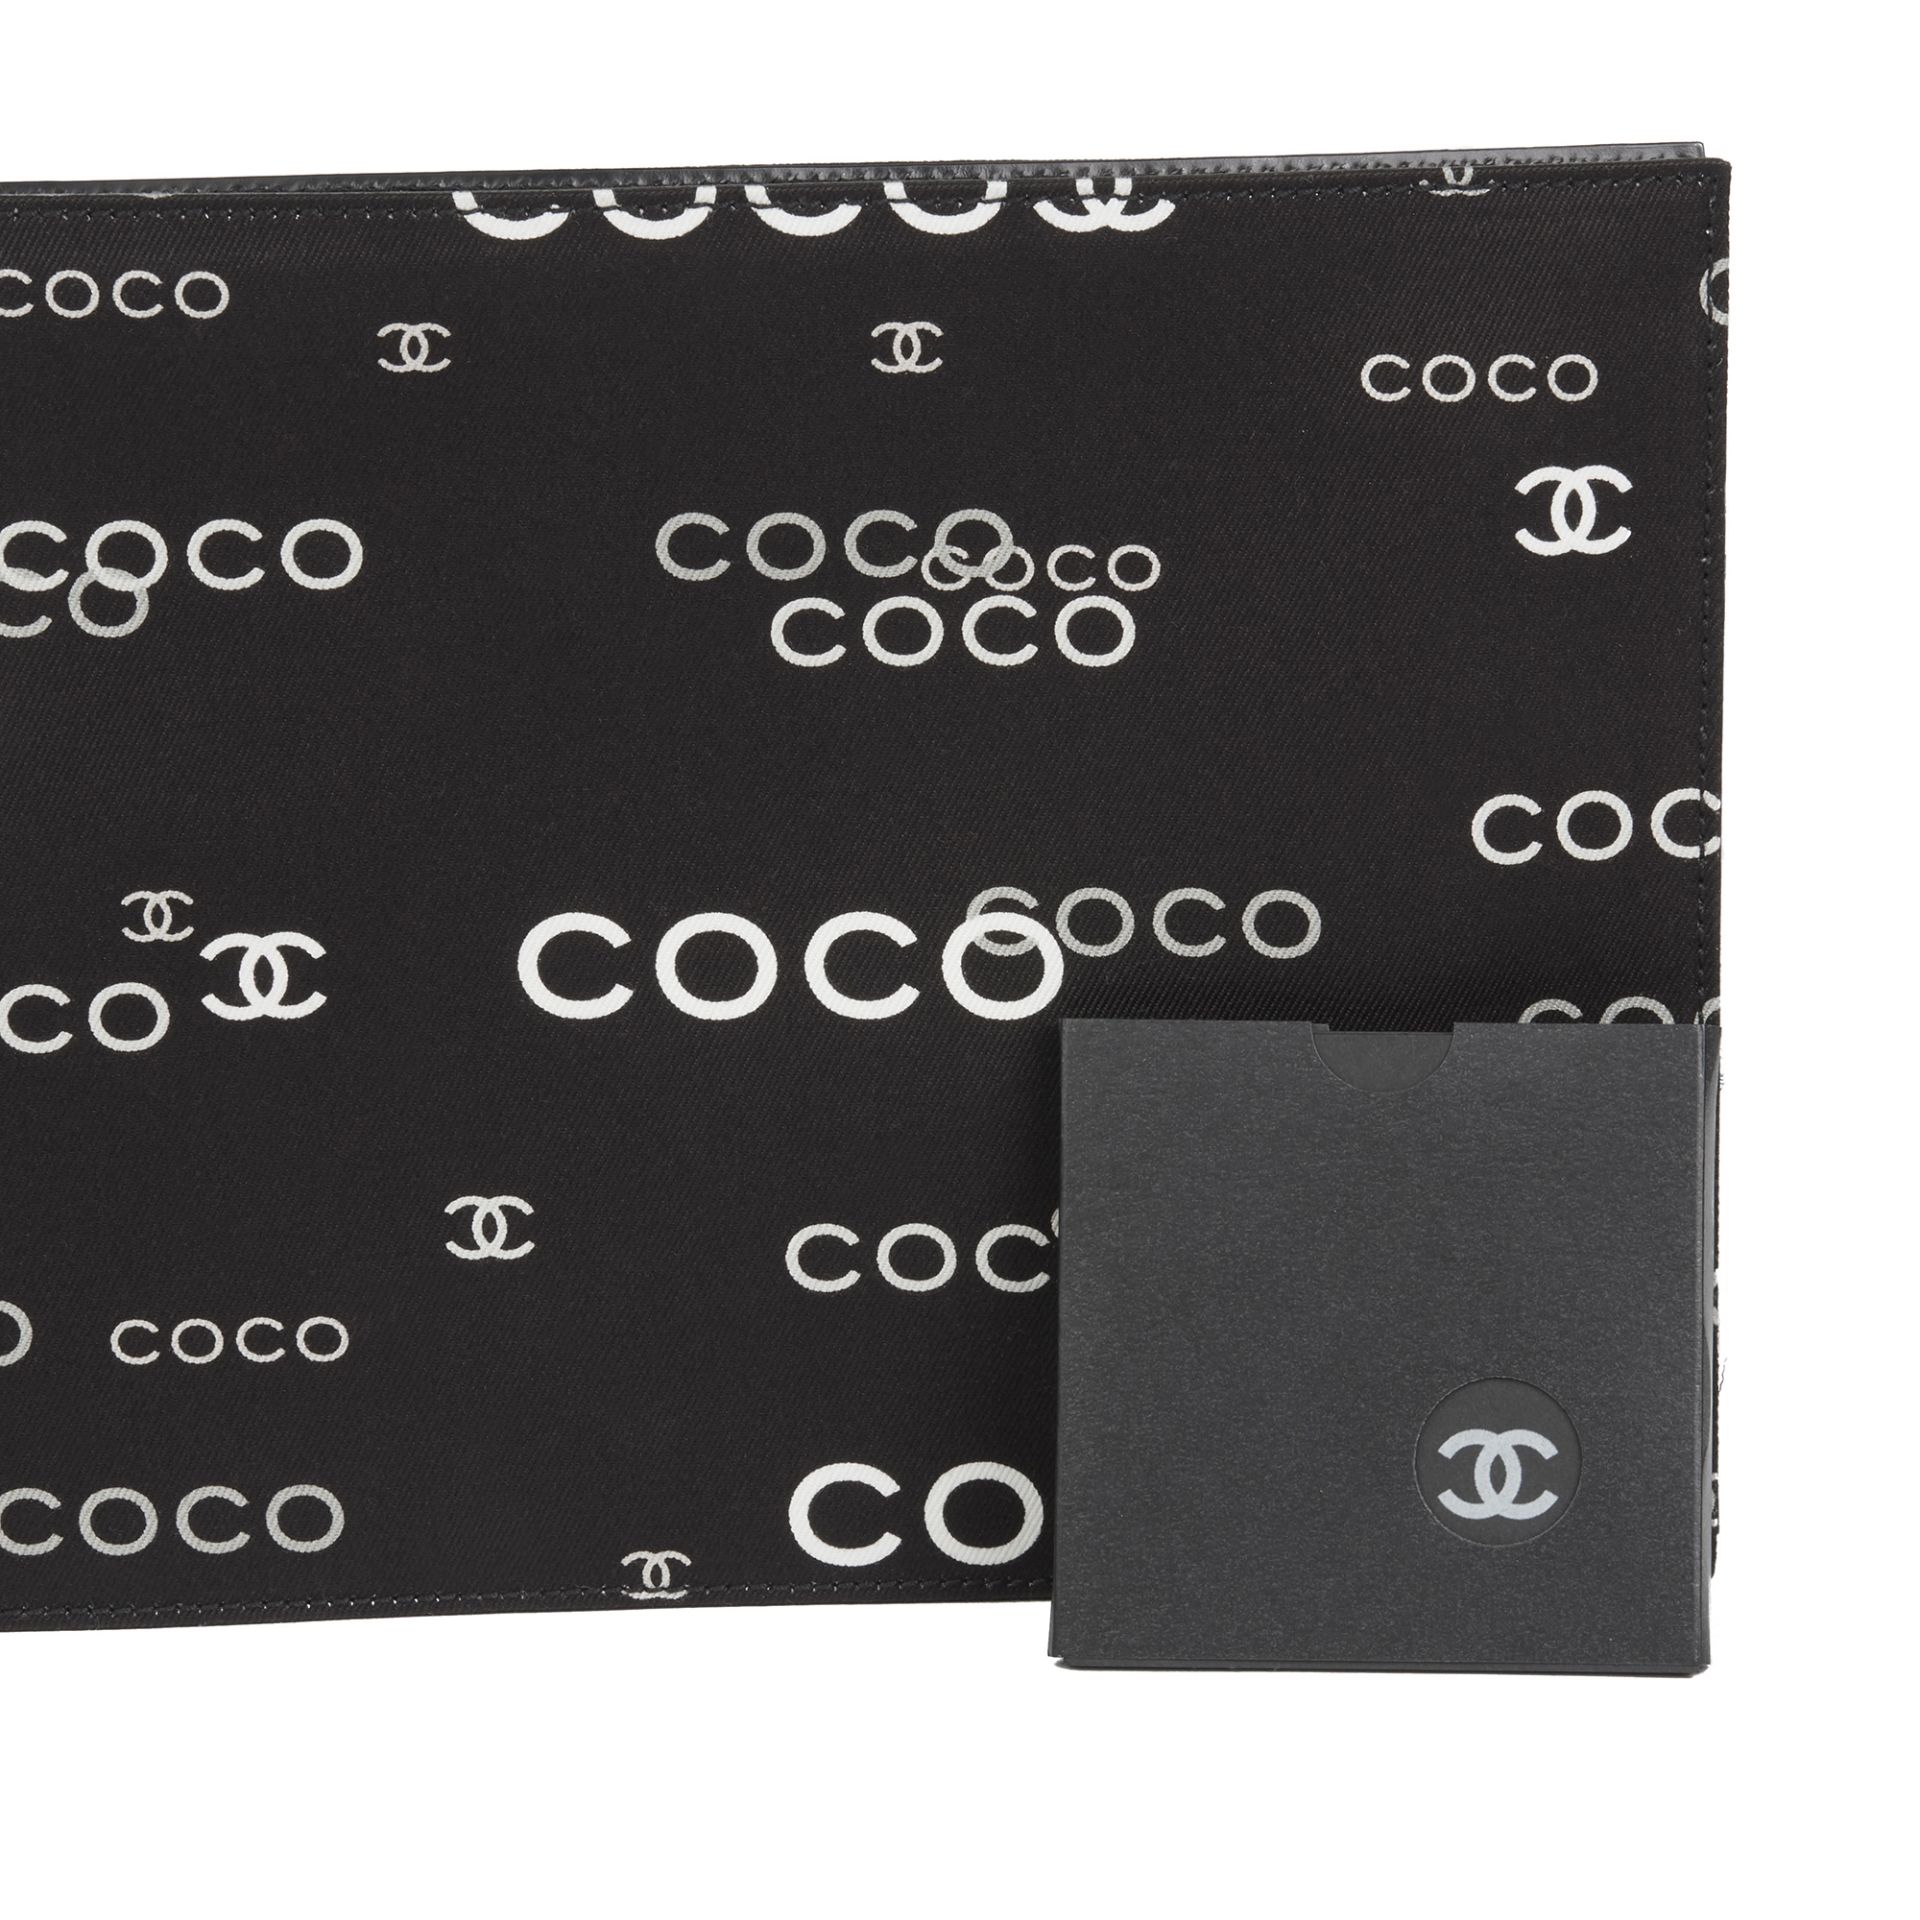 Chanel Black Canvas Coco Pouch - Image 3 of 12